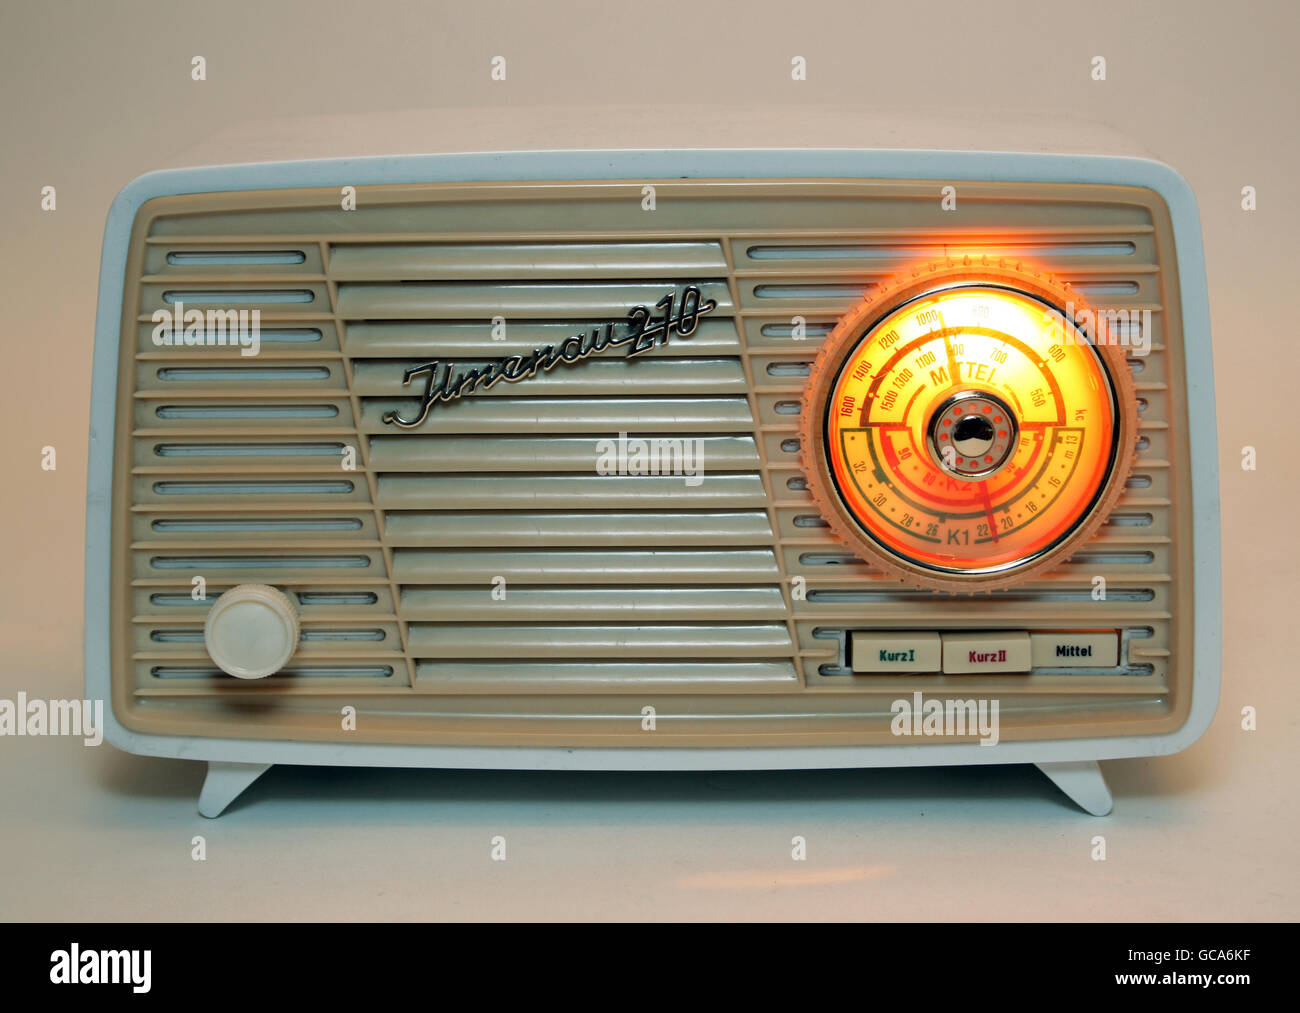 broadcast, radio, radio sets, "Kleinstsuper Ilmenau 210 - 64/72 W", made by  VEB Stern-Radio Sonneberg, GDR, 1959, Additional-Rights-Clearences-Not  Available Stock Photo - Alamy